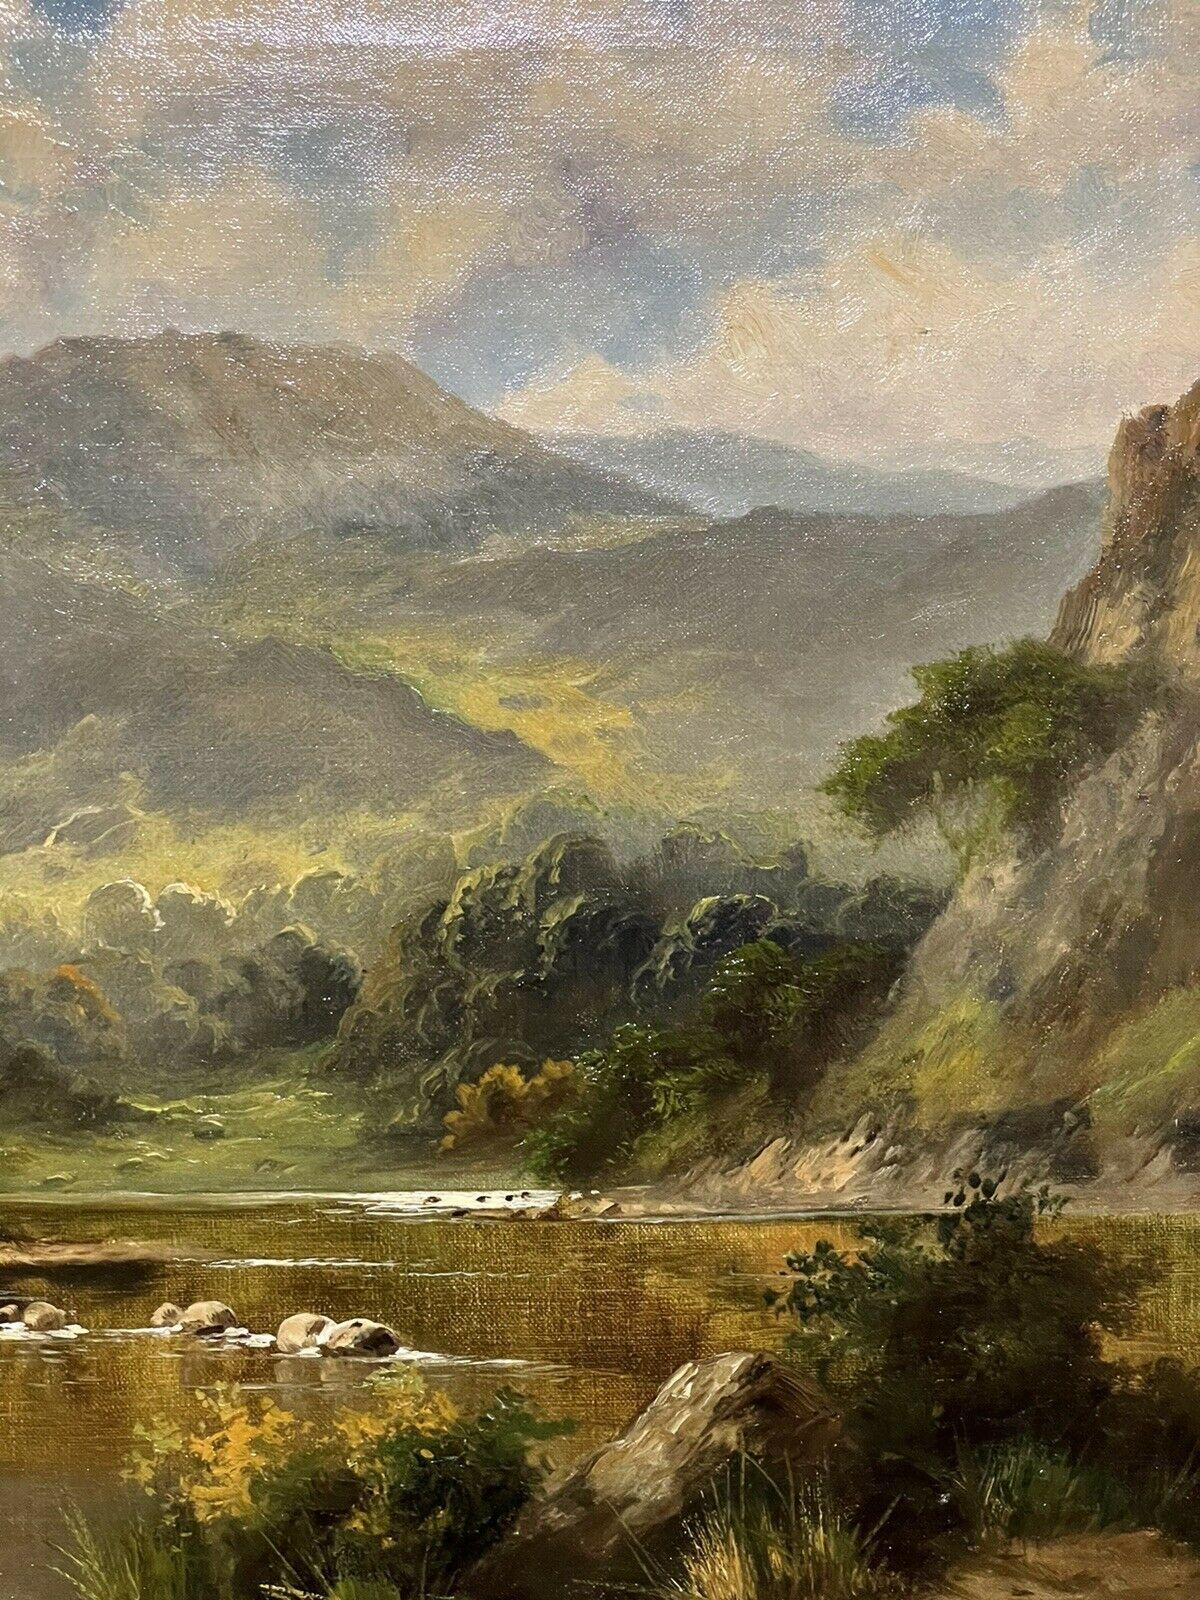 FINE ANTIQUE SCOTTISH HIGHLANDS OIL PAINTING - FIGURES BY MOUNTAINOUS LOCH SCENE - Victorian Painting by Jack M. Ducker